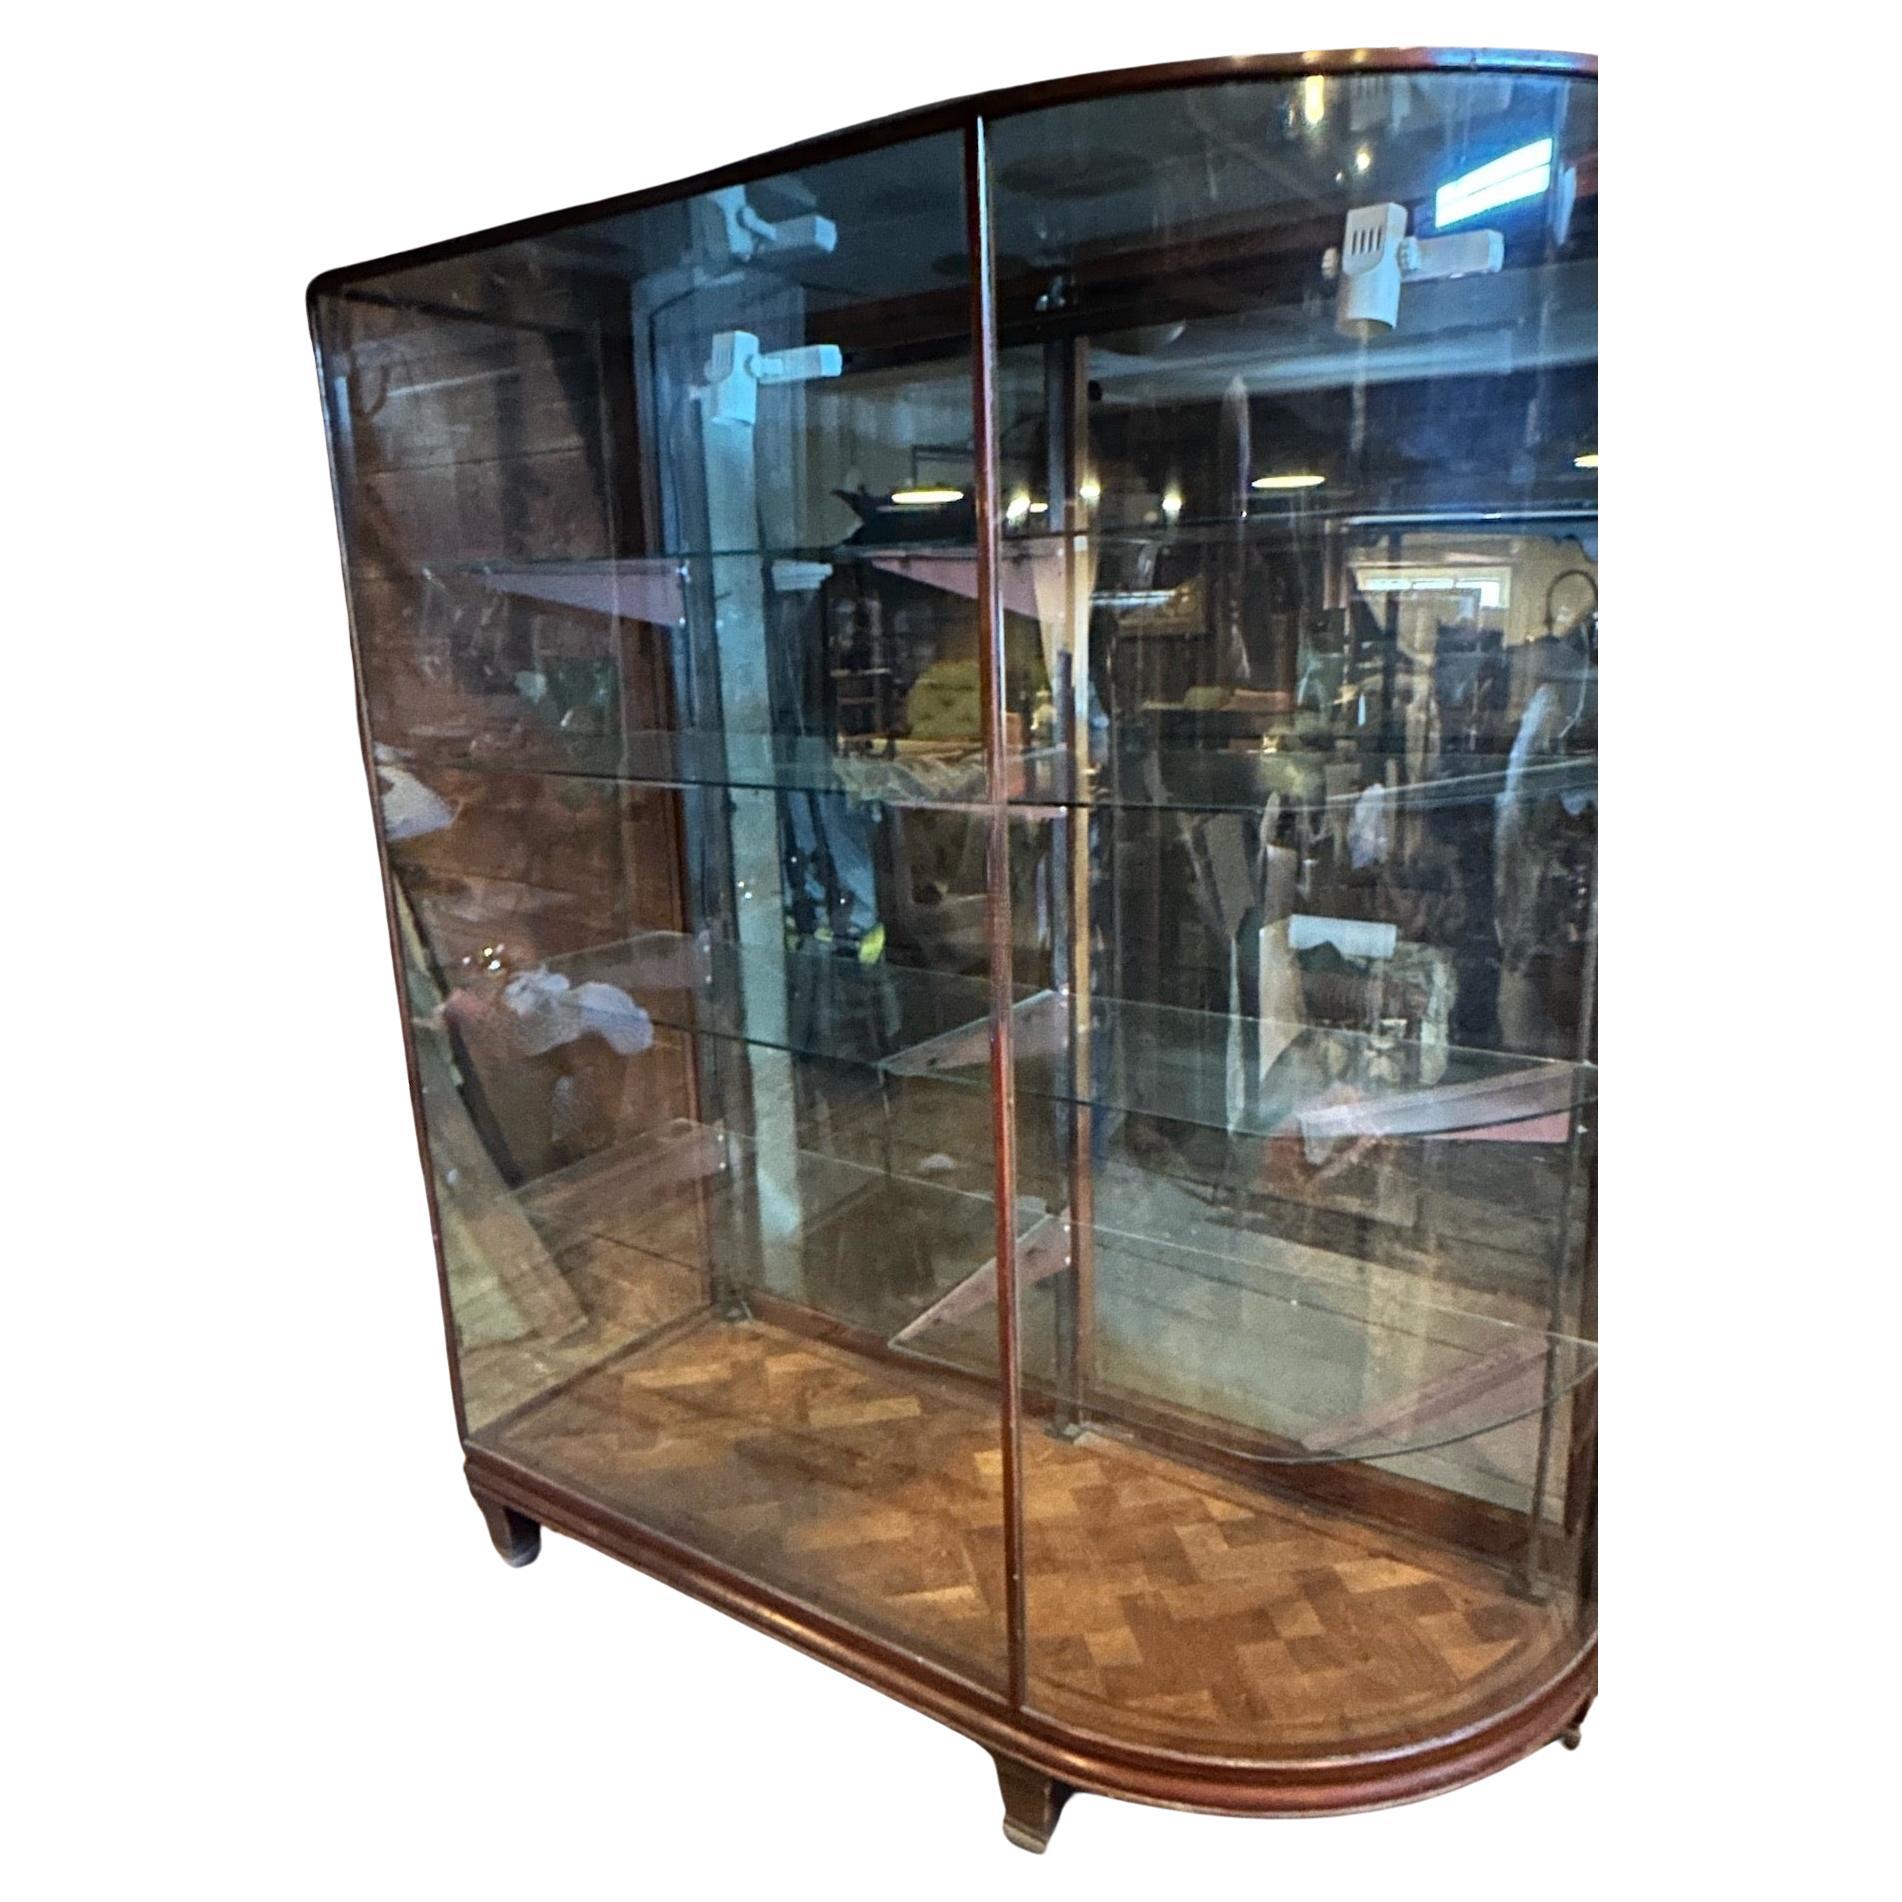 American Classical Pair 19th C Bow Glass Sided Display Cabinets from an Upscale Boston Fashion Shop For Sale